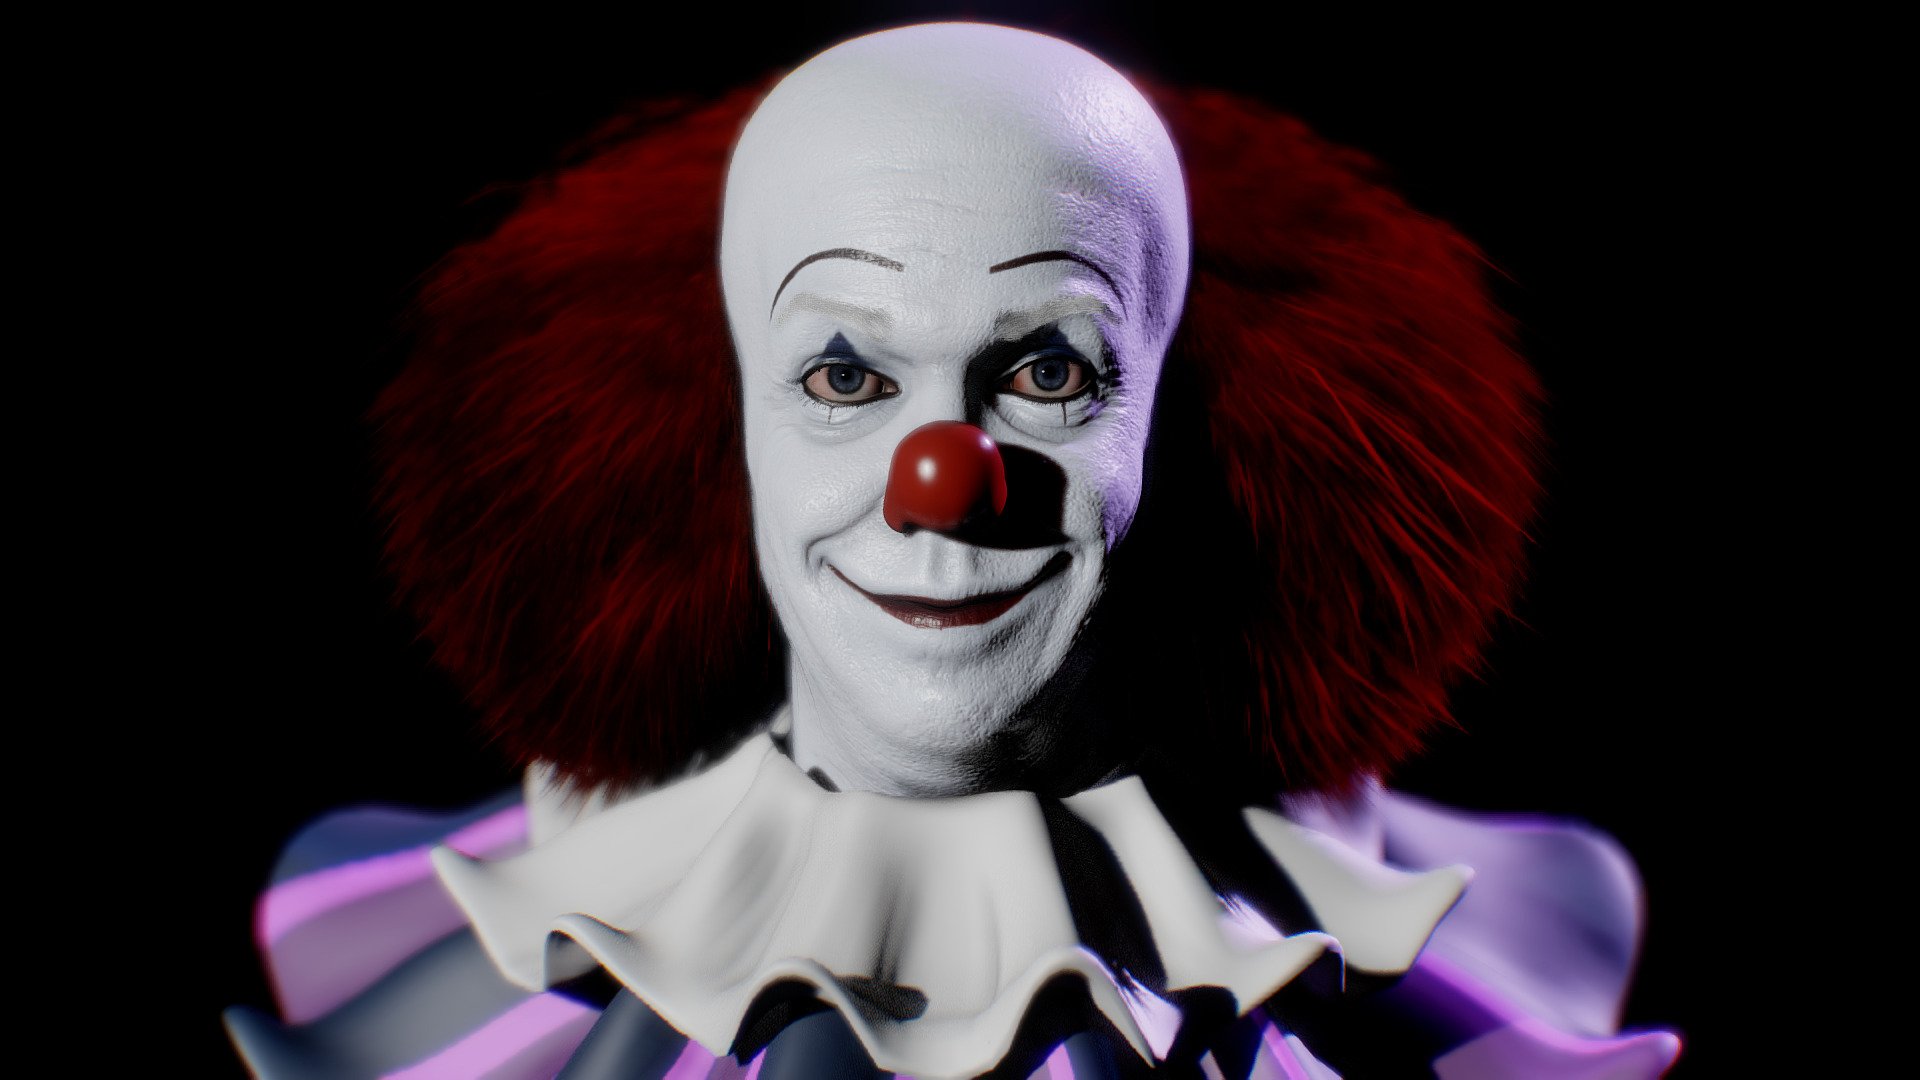 Pennywise The Dancing Clown 1990 Version Buy Royalty Free 3d Model By George Siskas Geosis093 Bfe84d4 - pennywise the dancing clown song roblox id